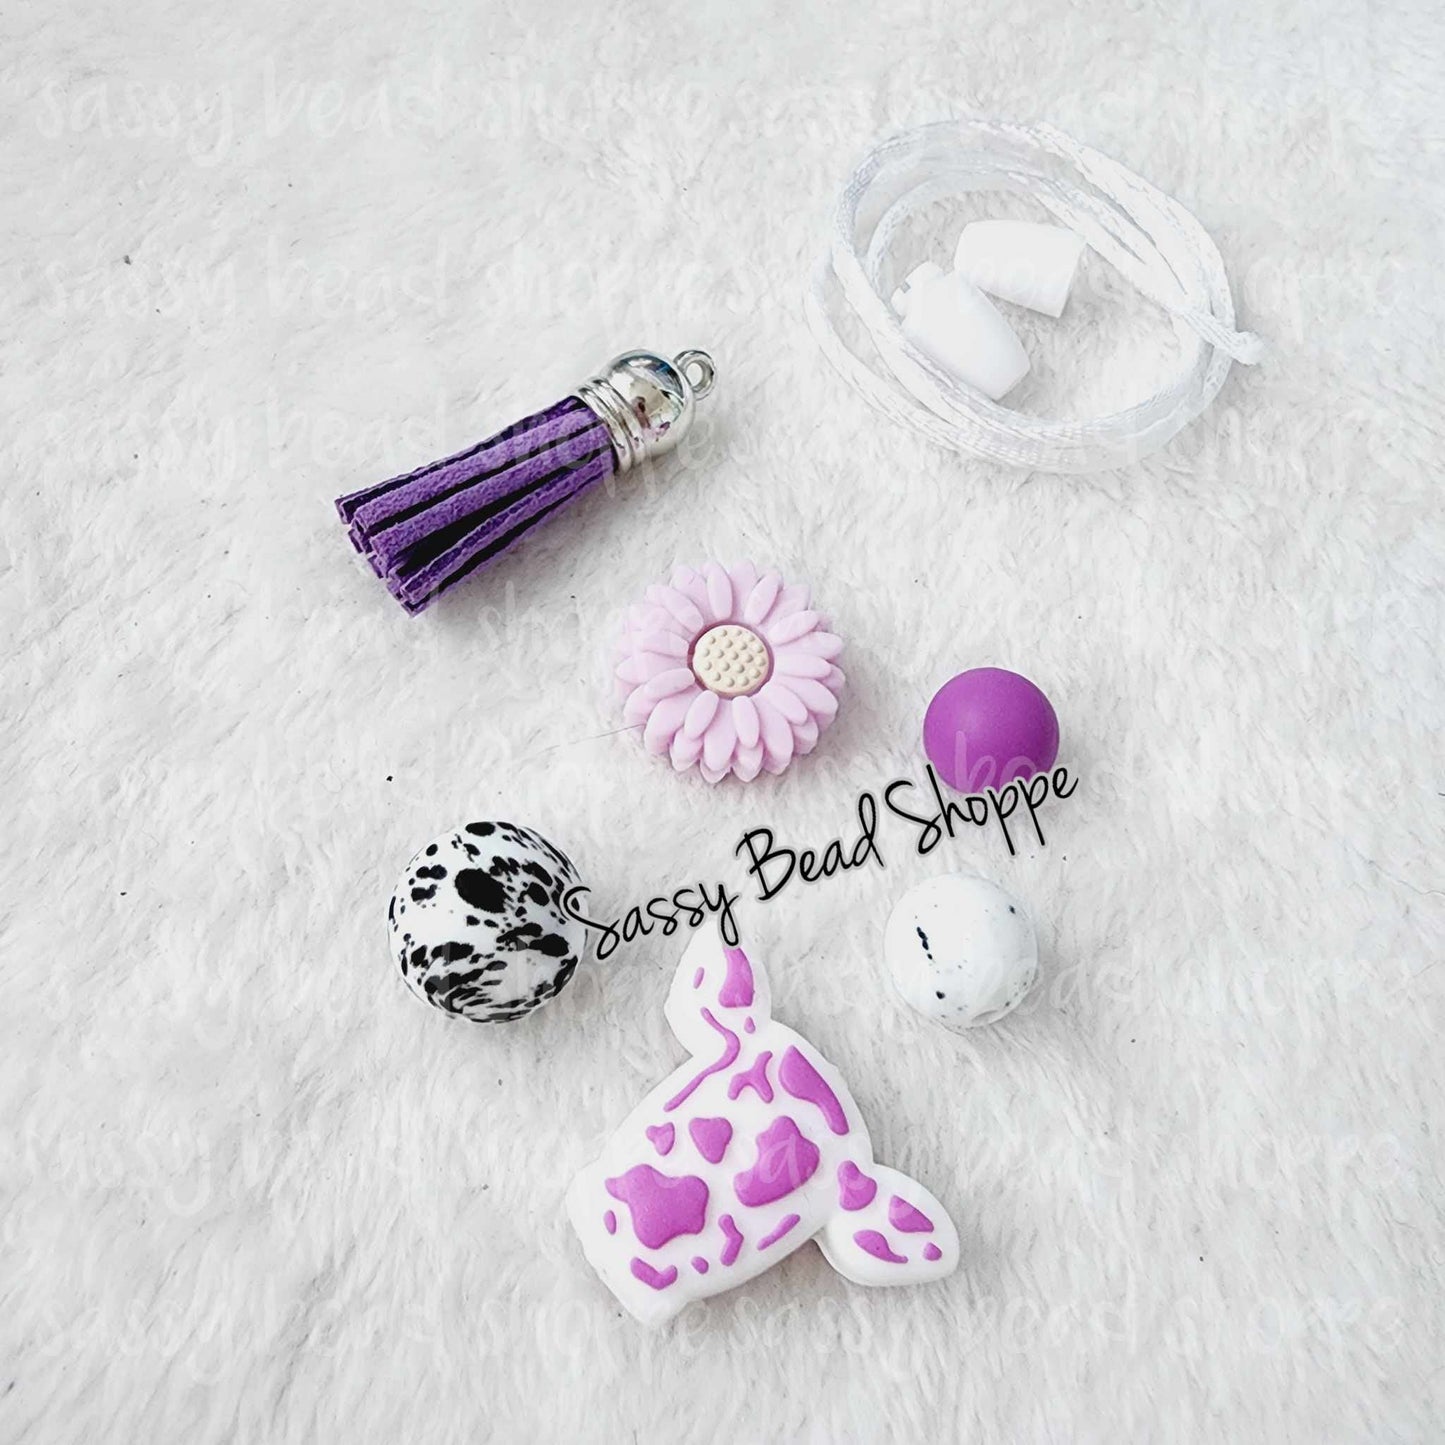 Sassy Bead Shoppe Western Cow Purple Car Charm What you will receive in your kit